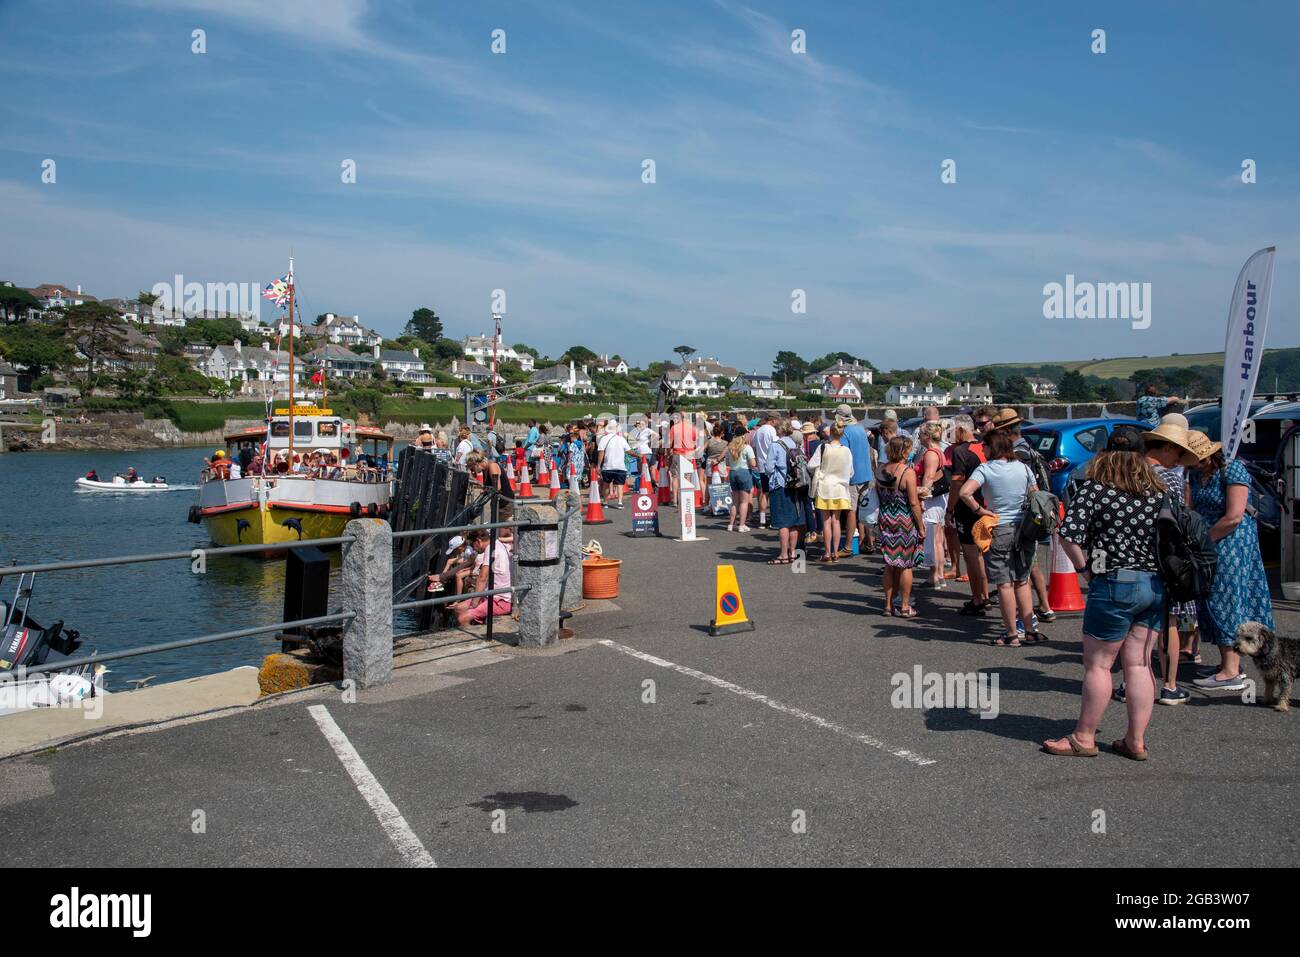 St Mawes, Cornwall, England, UK. 2021.  Passengers queue for the ferry to Falmouth on the harbour at St Mawes a popular tourist coastal town. Stock Photo